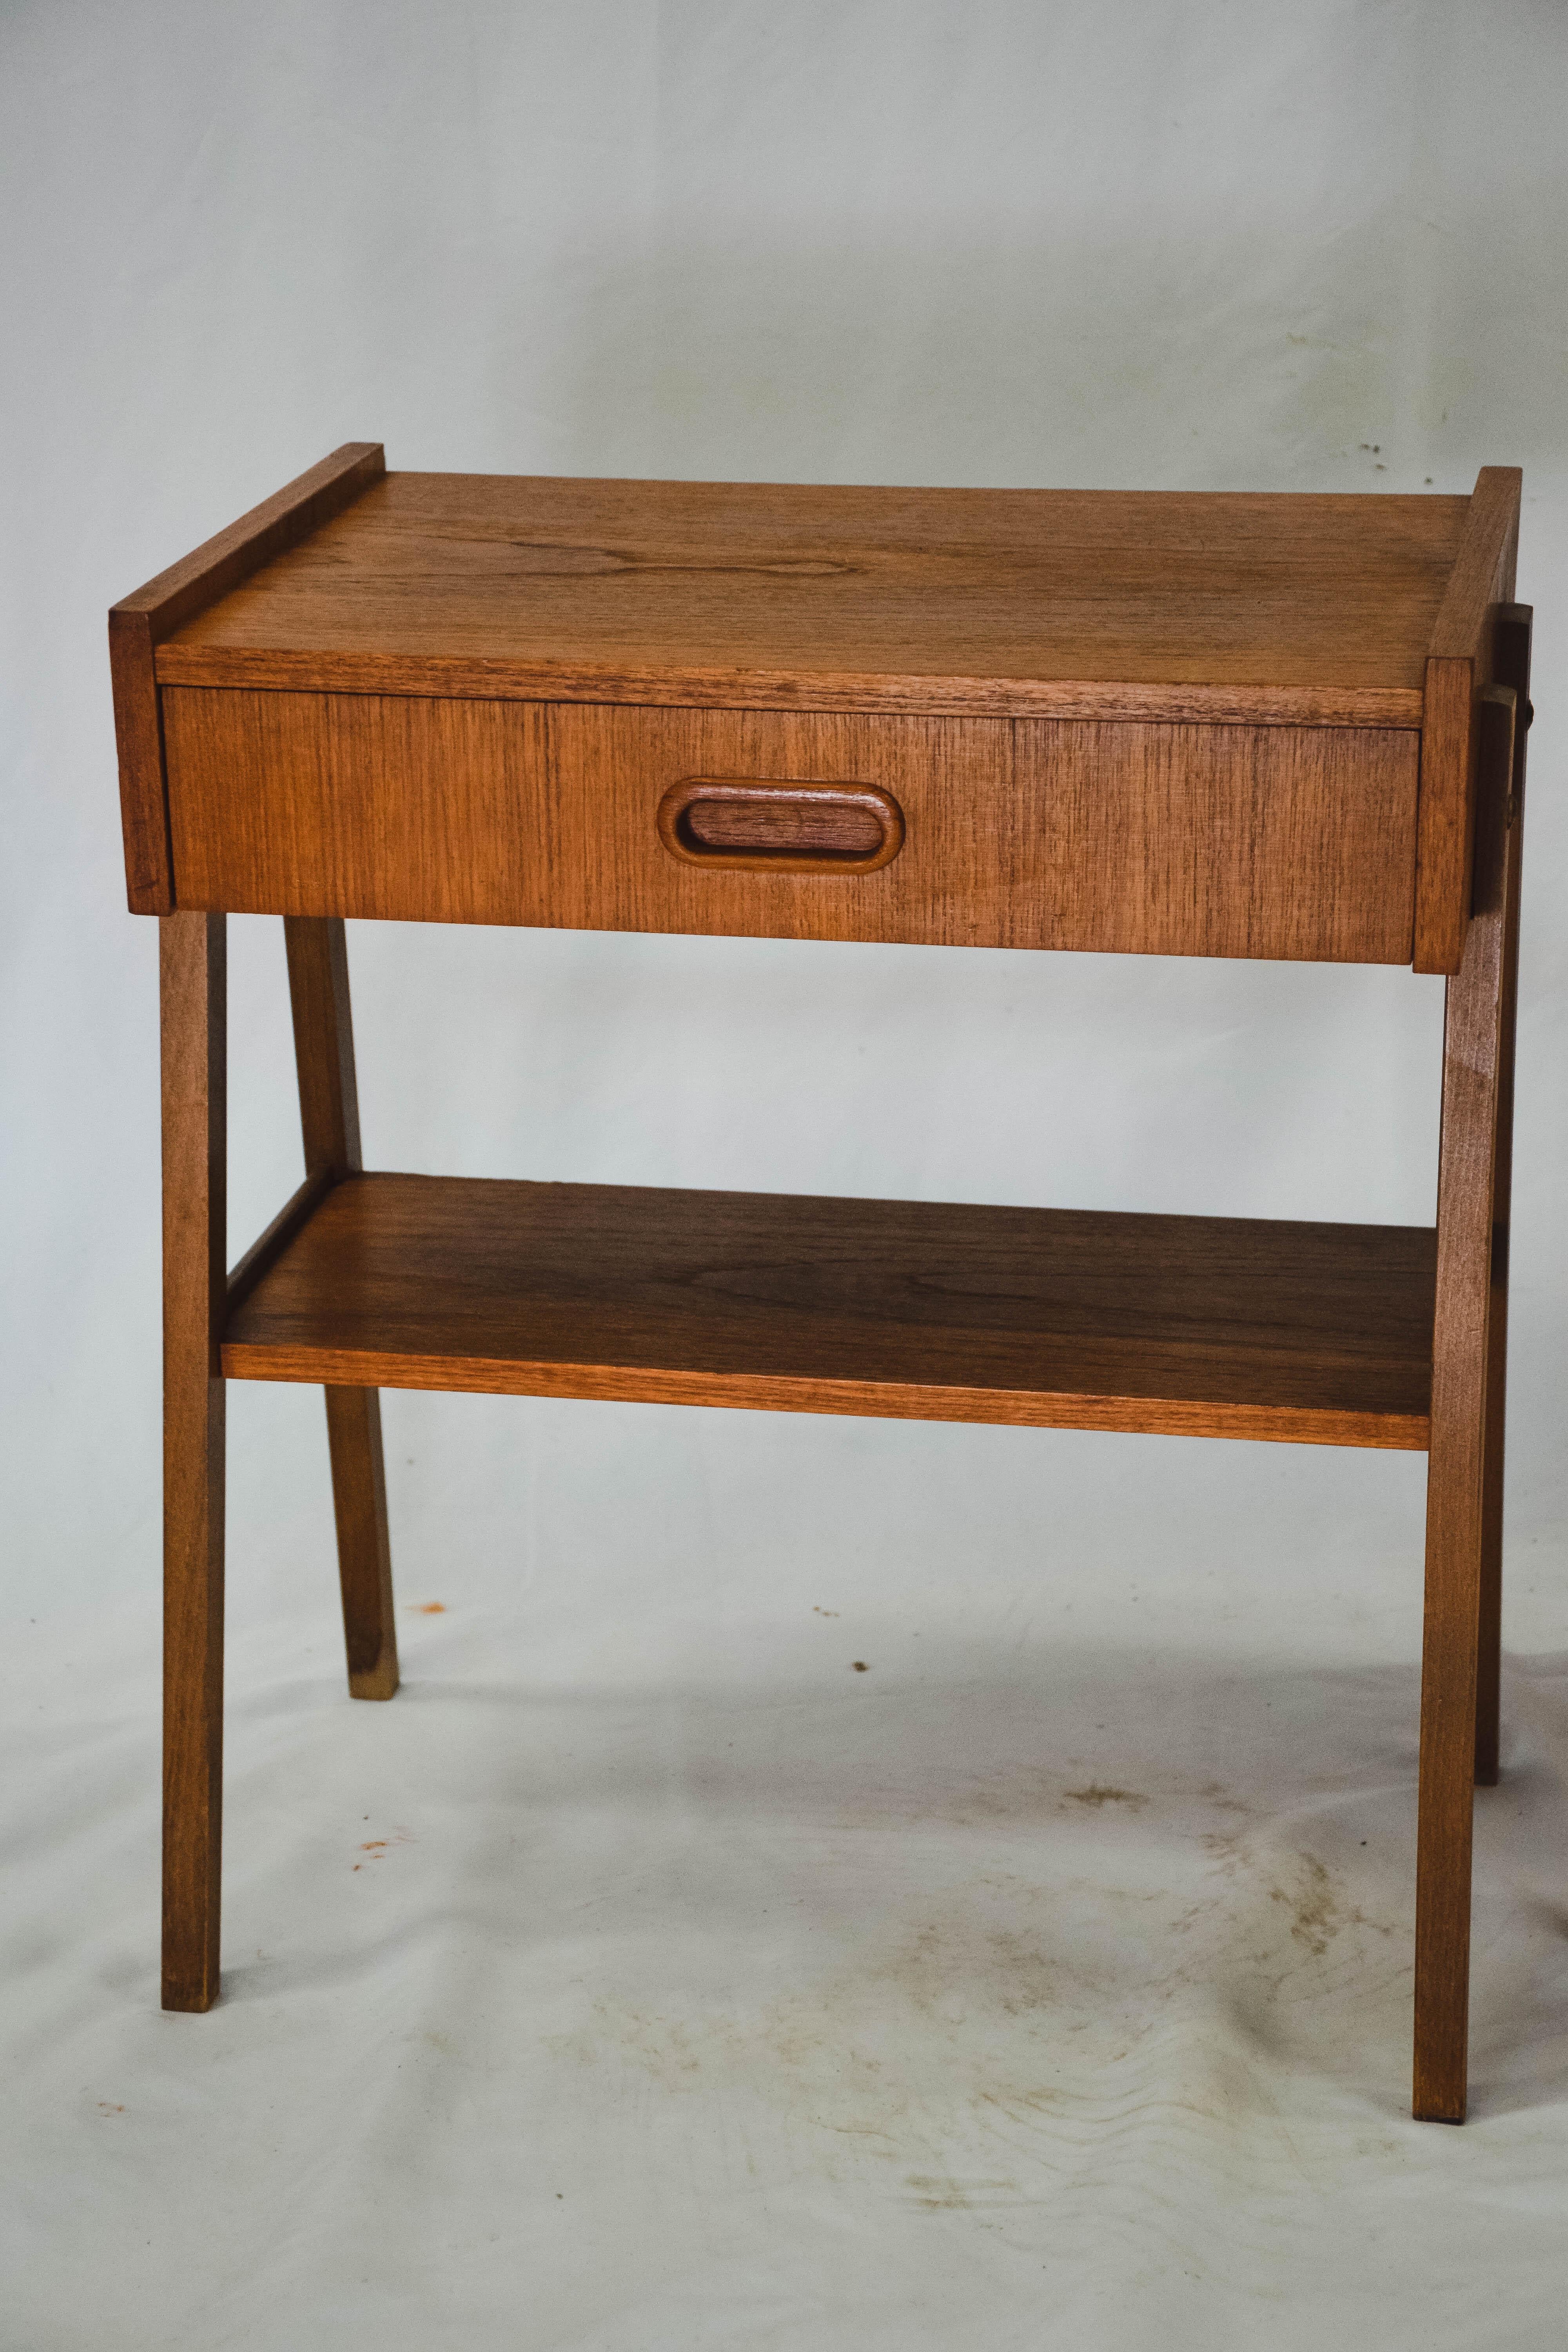 Lovely and elegant pair of vintage teak bedside tables with drawers and slightly outwards tilted front legs. These midcentury night tables have rounded legs and underneath a shelf for newspaper, books etc. Scandinavian design and good vintage